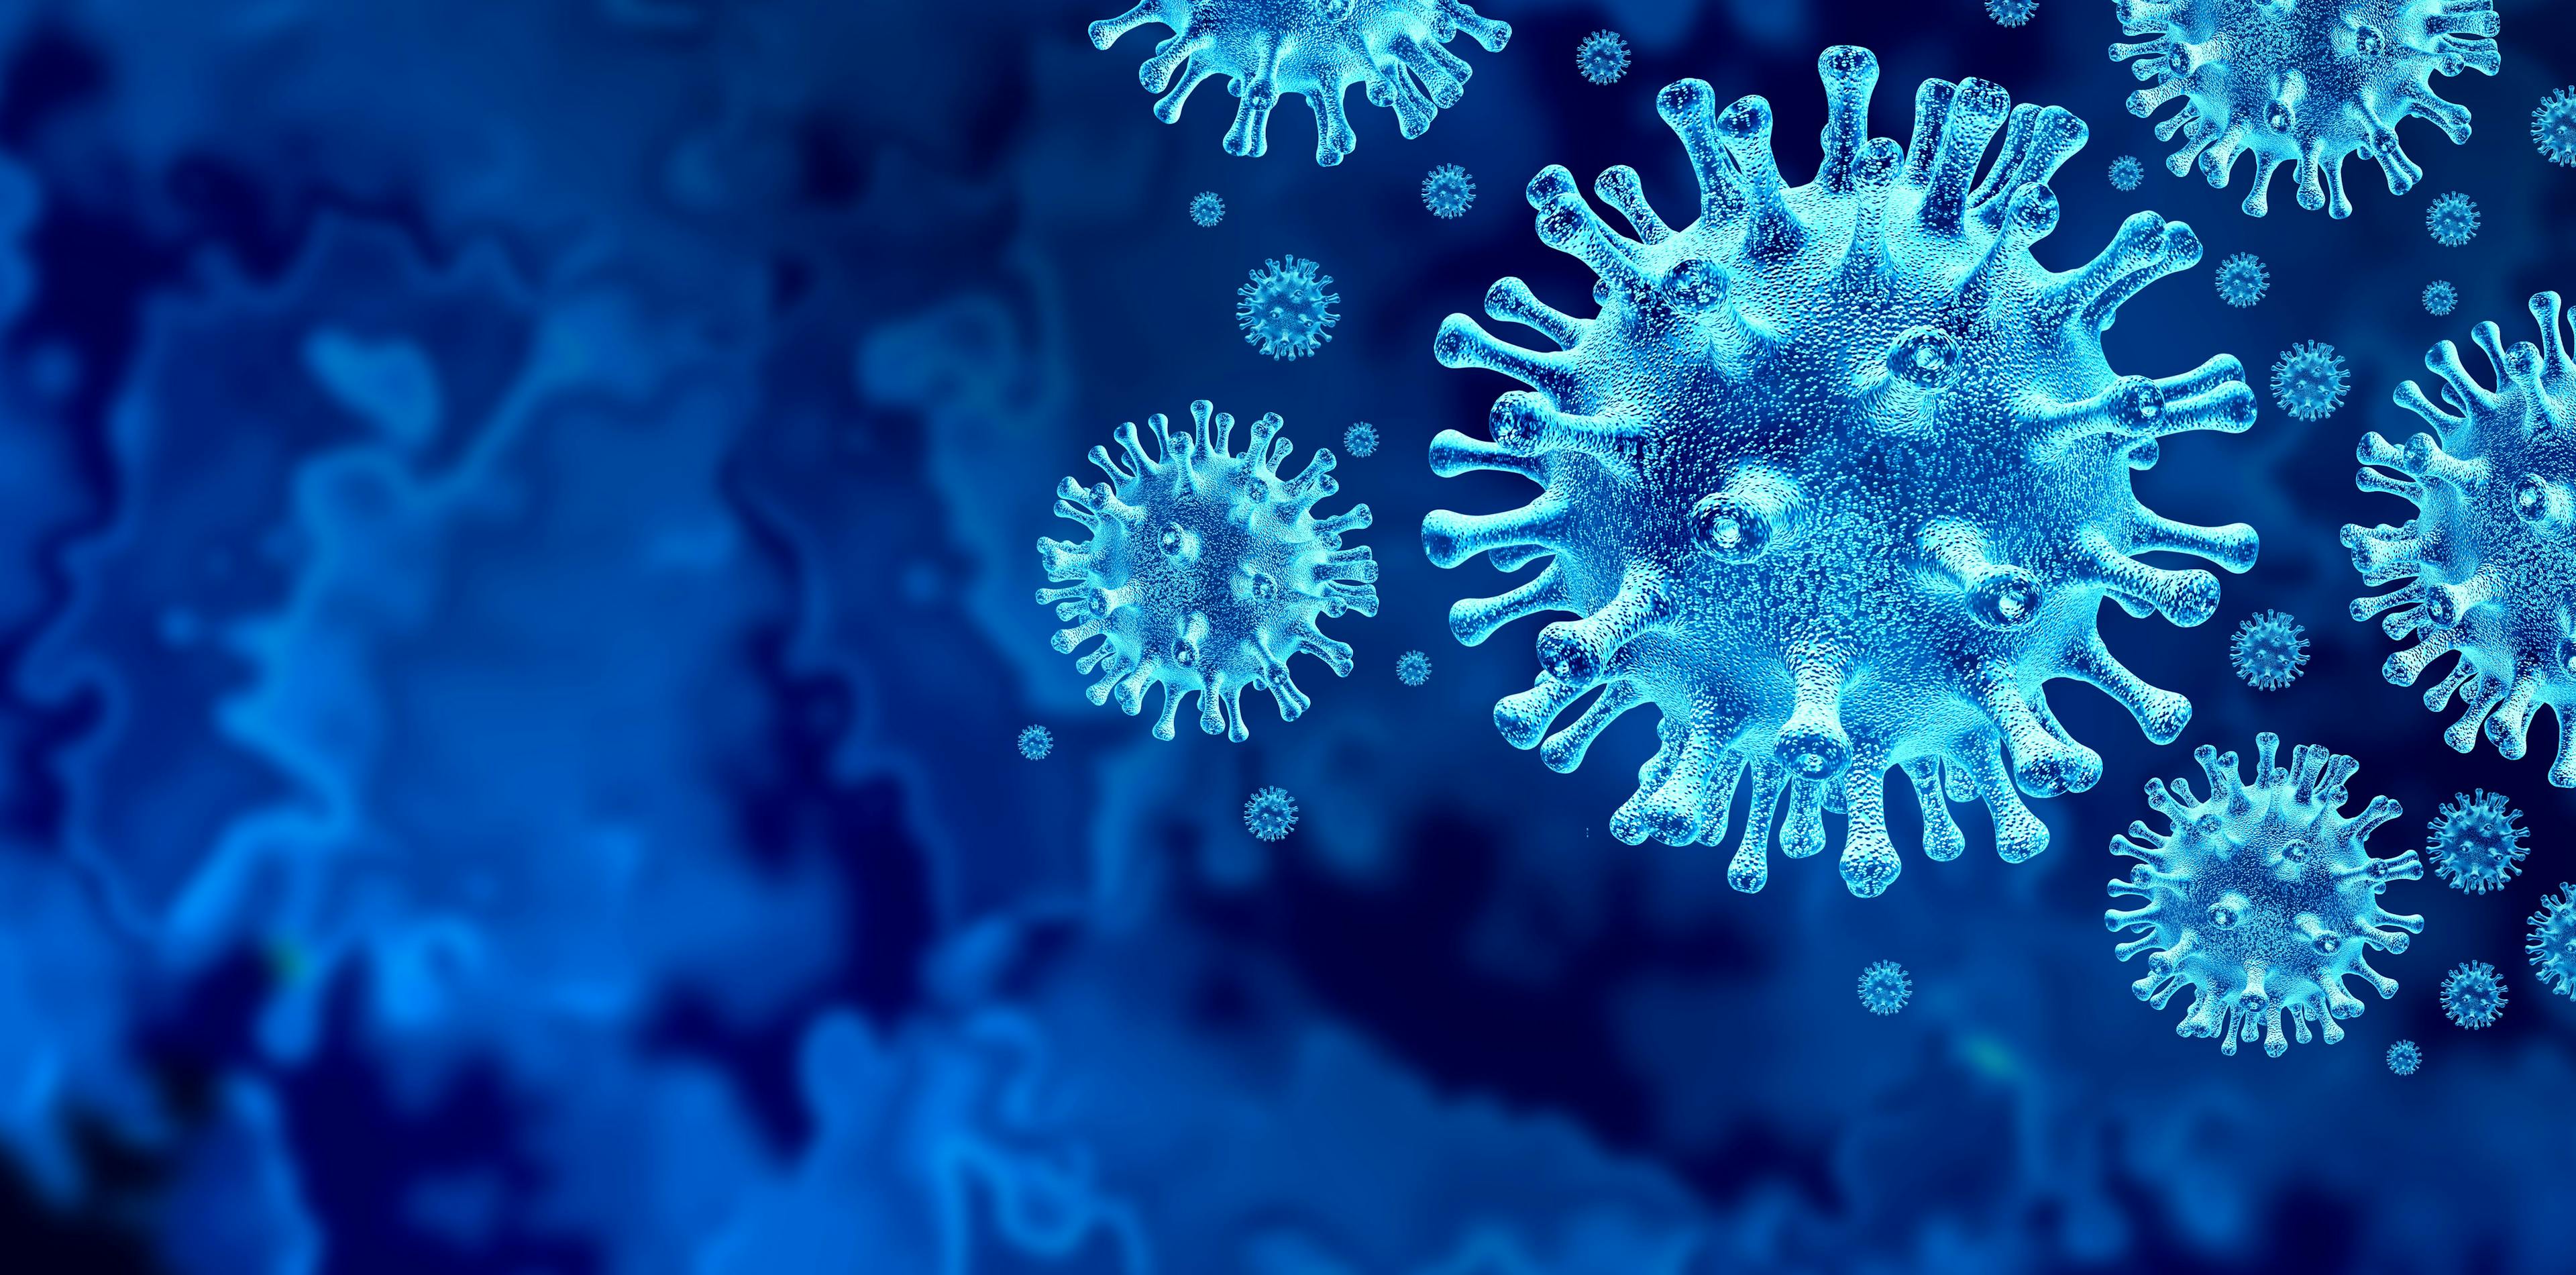 COVID-19 Virus Seen Linked to Altered Mental Status, Headaches in Hospitalized Children